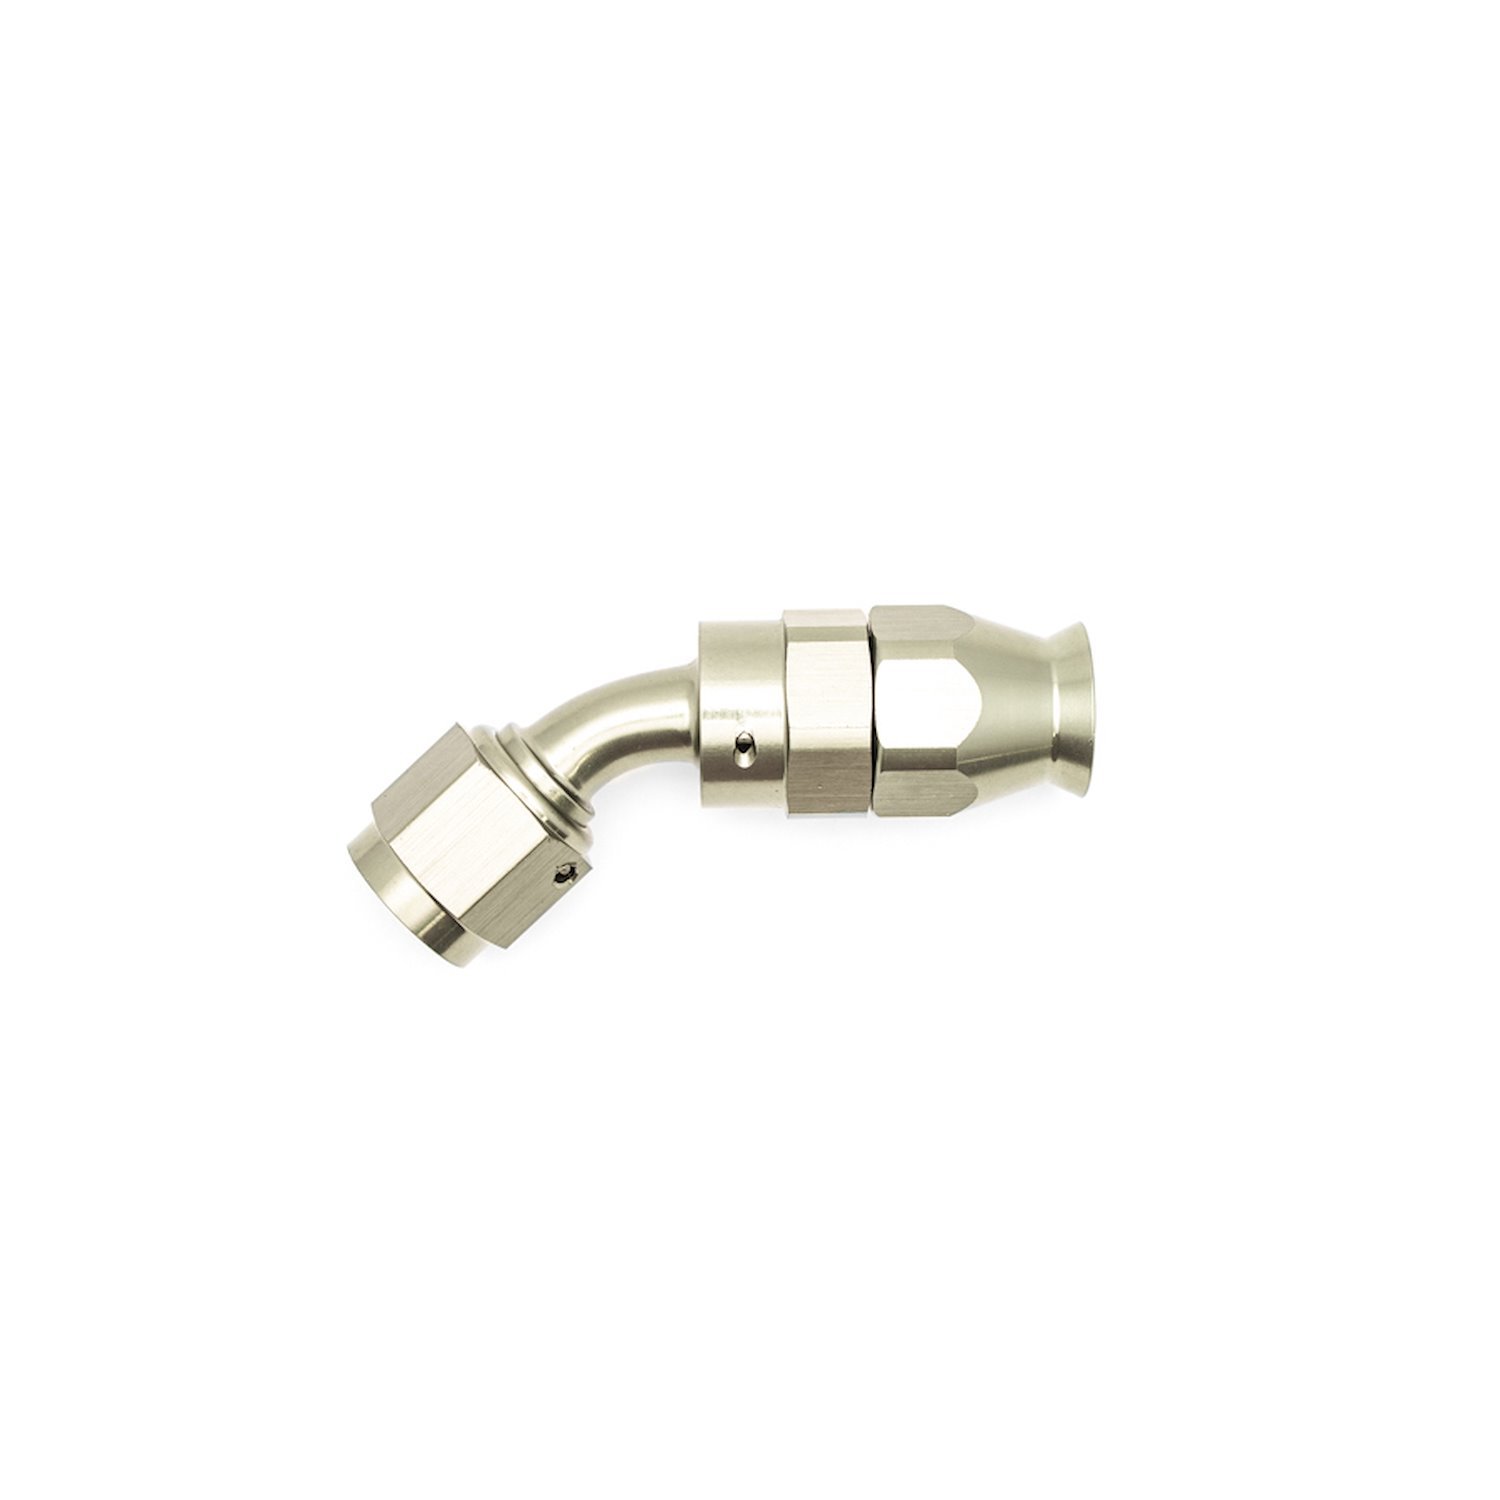 6020851 6AN Female Swivel 45-Degree Hose End PTFE (Incl 1 Olive Insert) Anodized DW Titanium